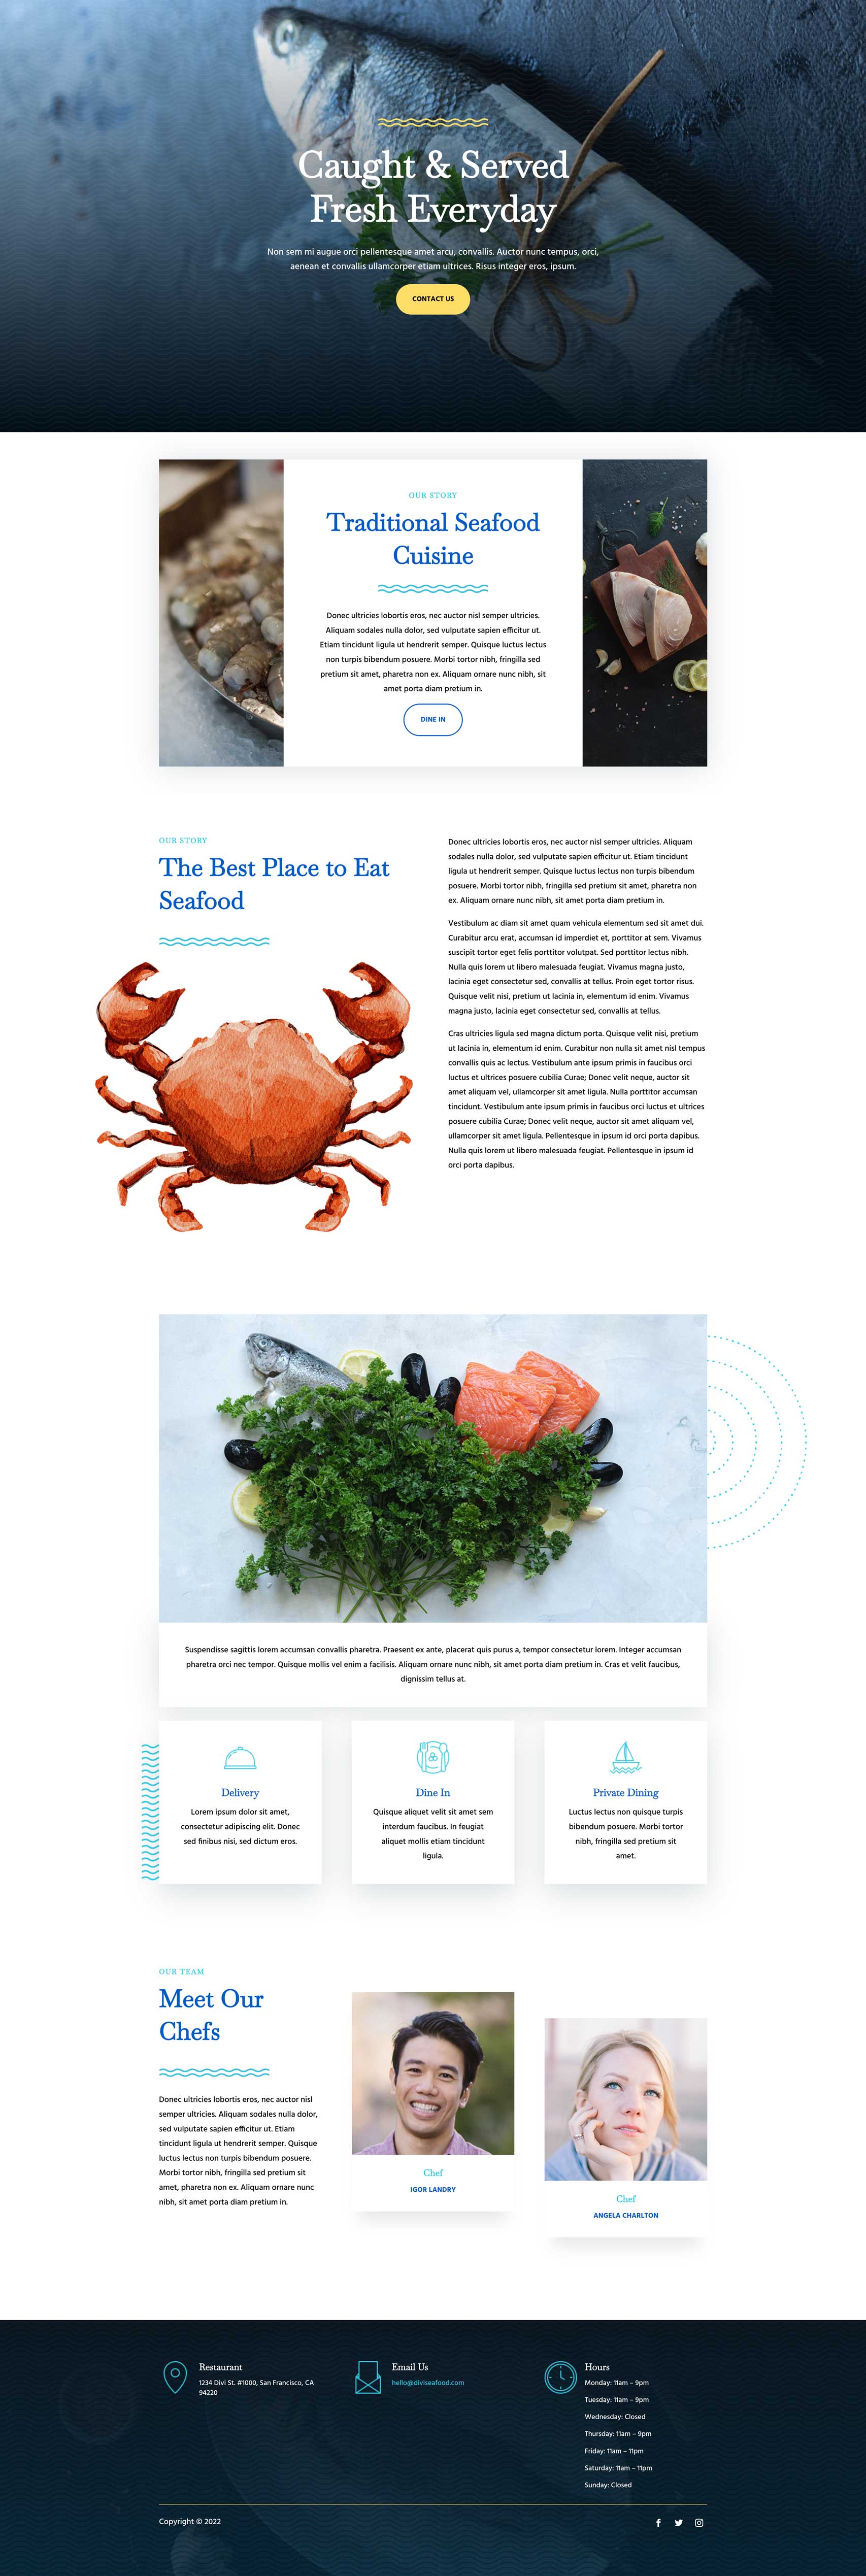 seafood-restaurant-about-page Get a FREE Seafood Restaurant Layout Pack for Divi